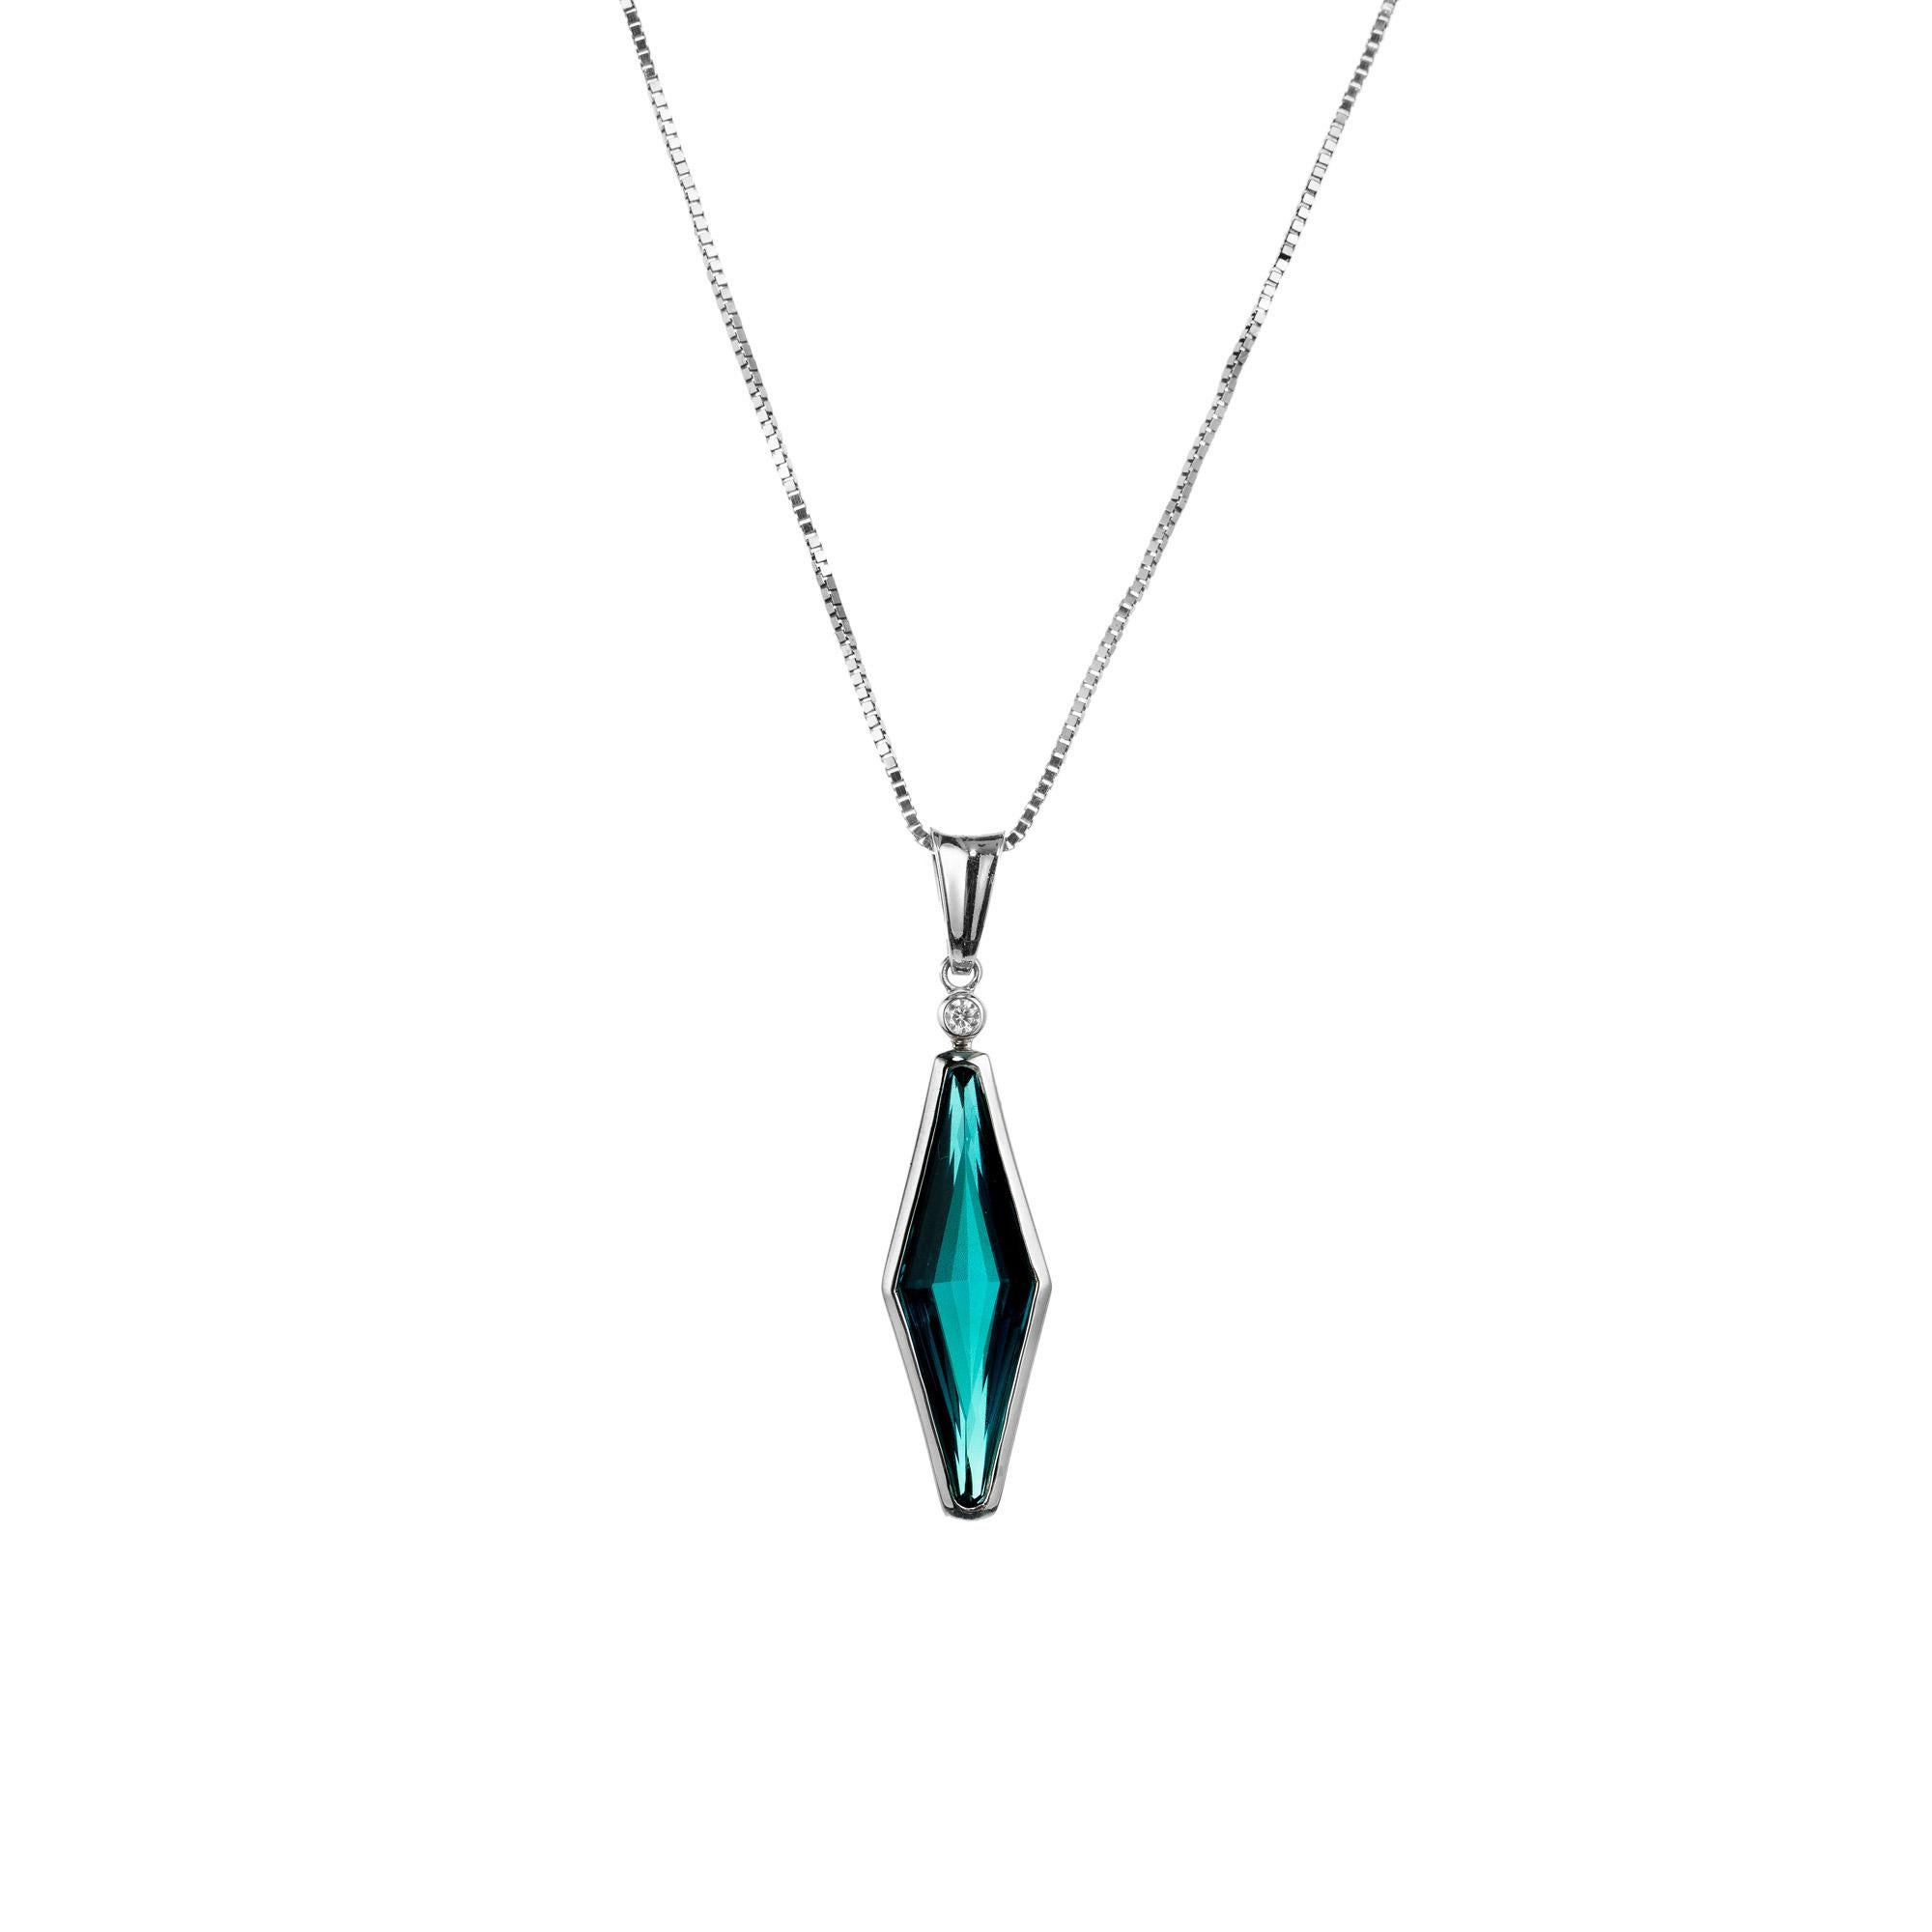 Elongated Tourmaline and Diamond pendant necklace. This pendant is mounted with a blue green hexagon shape tourmaline. Bezel set in 18k white gold, this gemstone weighs approximately 4.95cts. Accented with one round brilliant cut diamond. The 18k